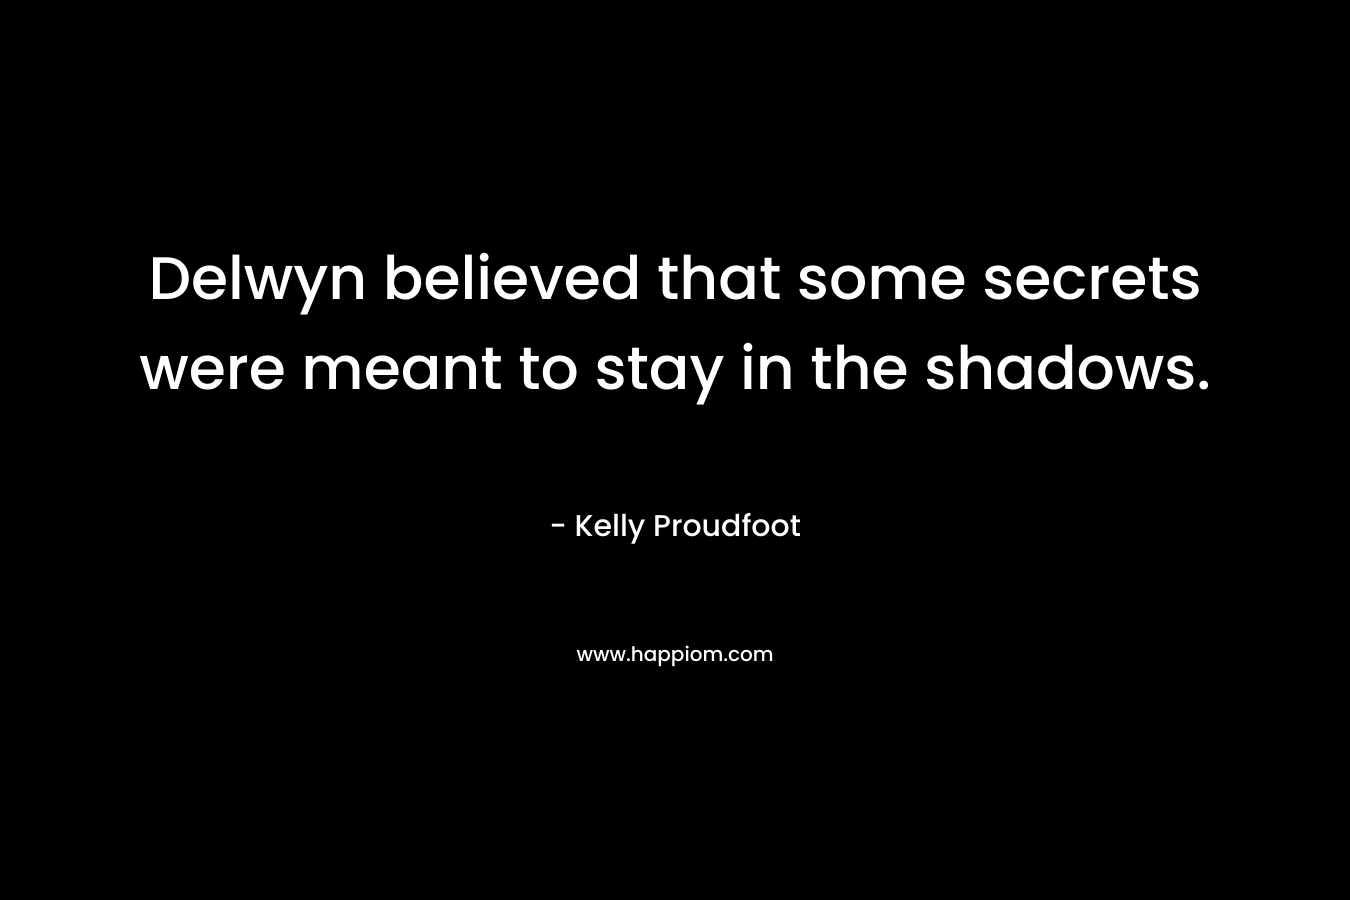 Delwyn believed that some secrets were meant to stay in the shadows. – Kelly Proudfoot